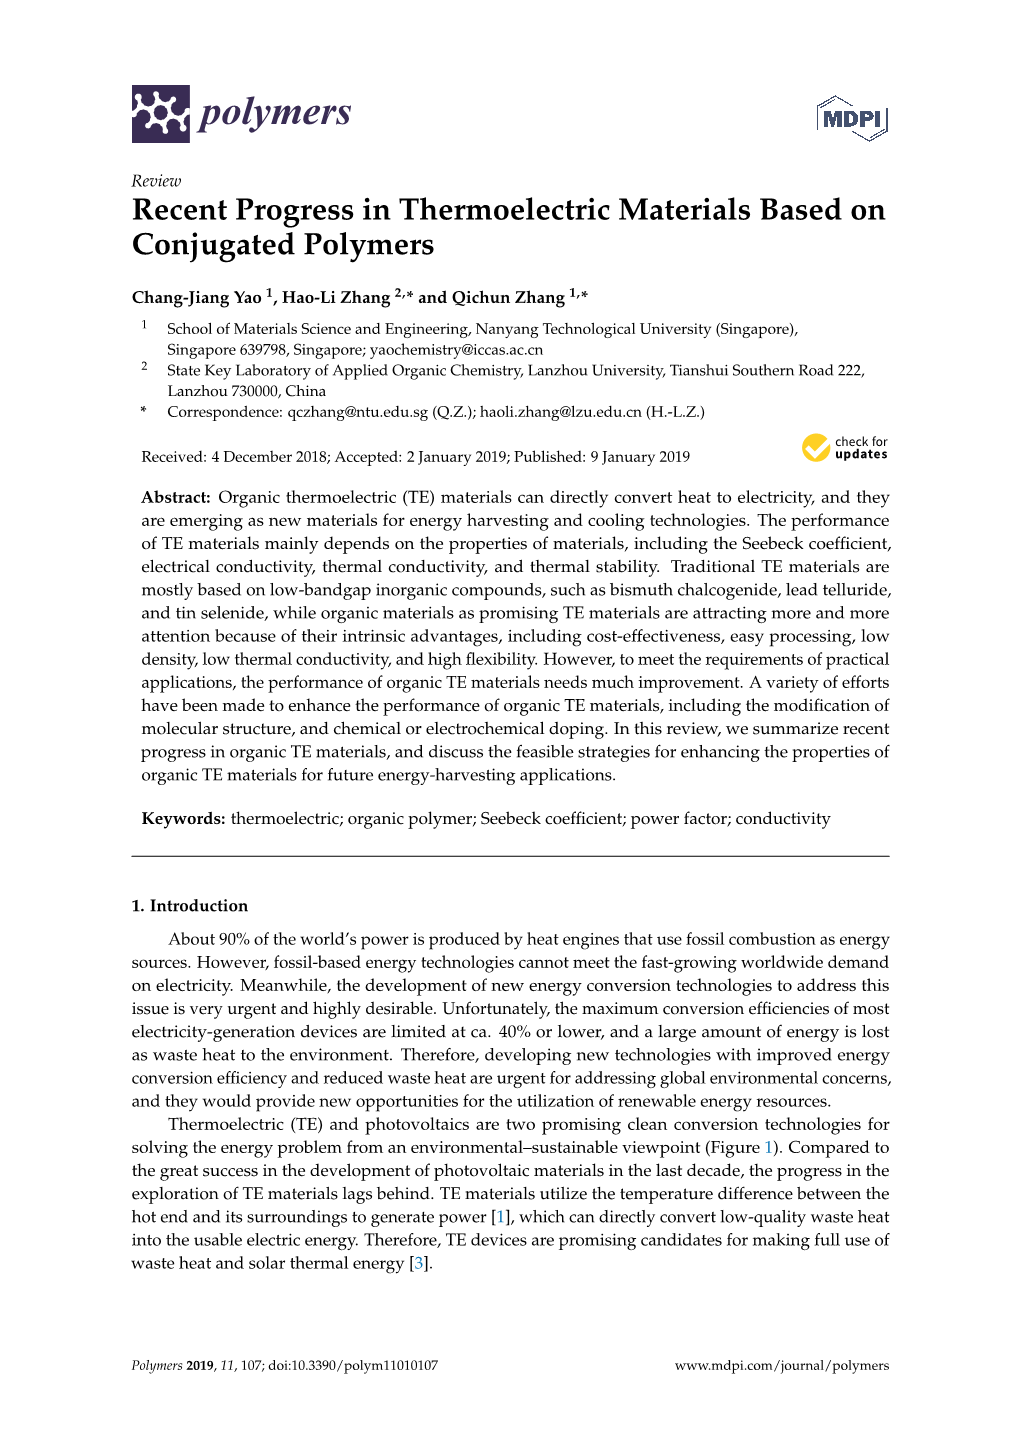 Recent Progress in Thermoelectric Materials Based on Conjugated Polymers